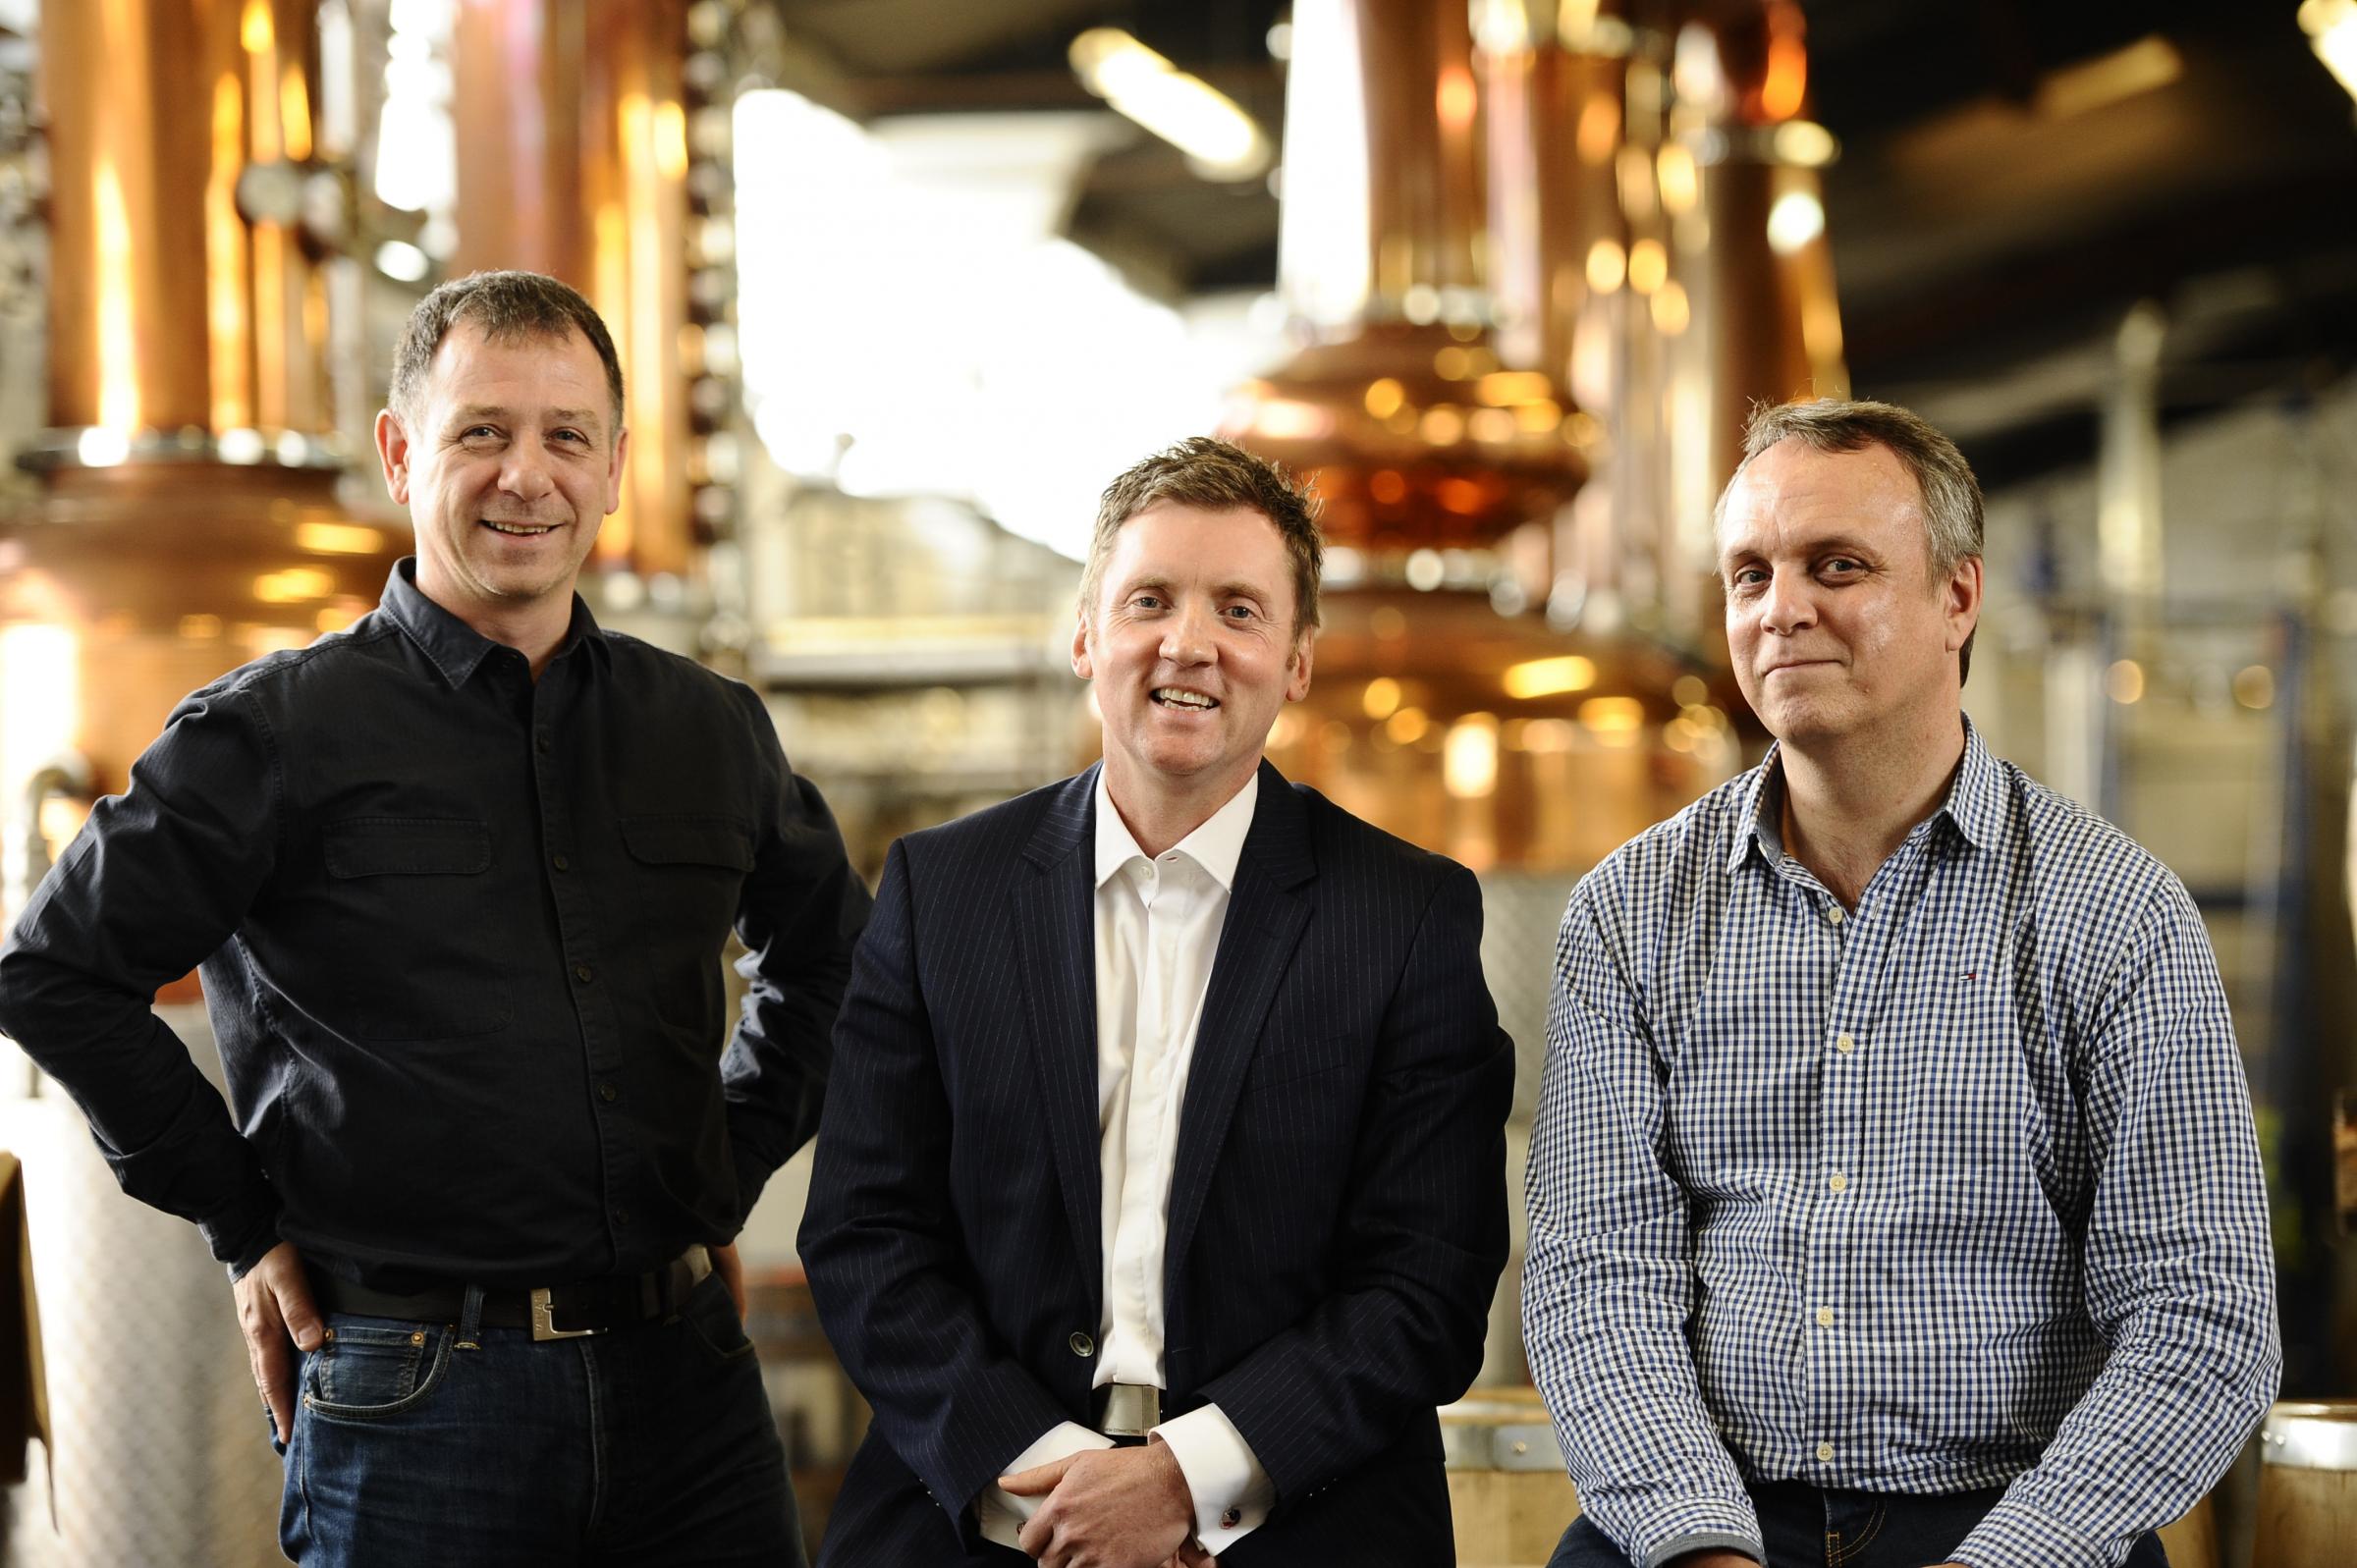 The Glasgow Distillery Company secures £5.5m lending package from Barclays